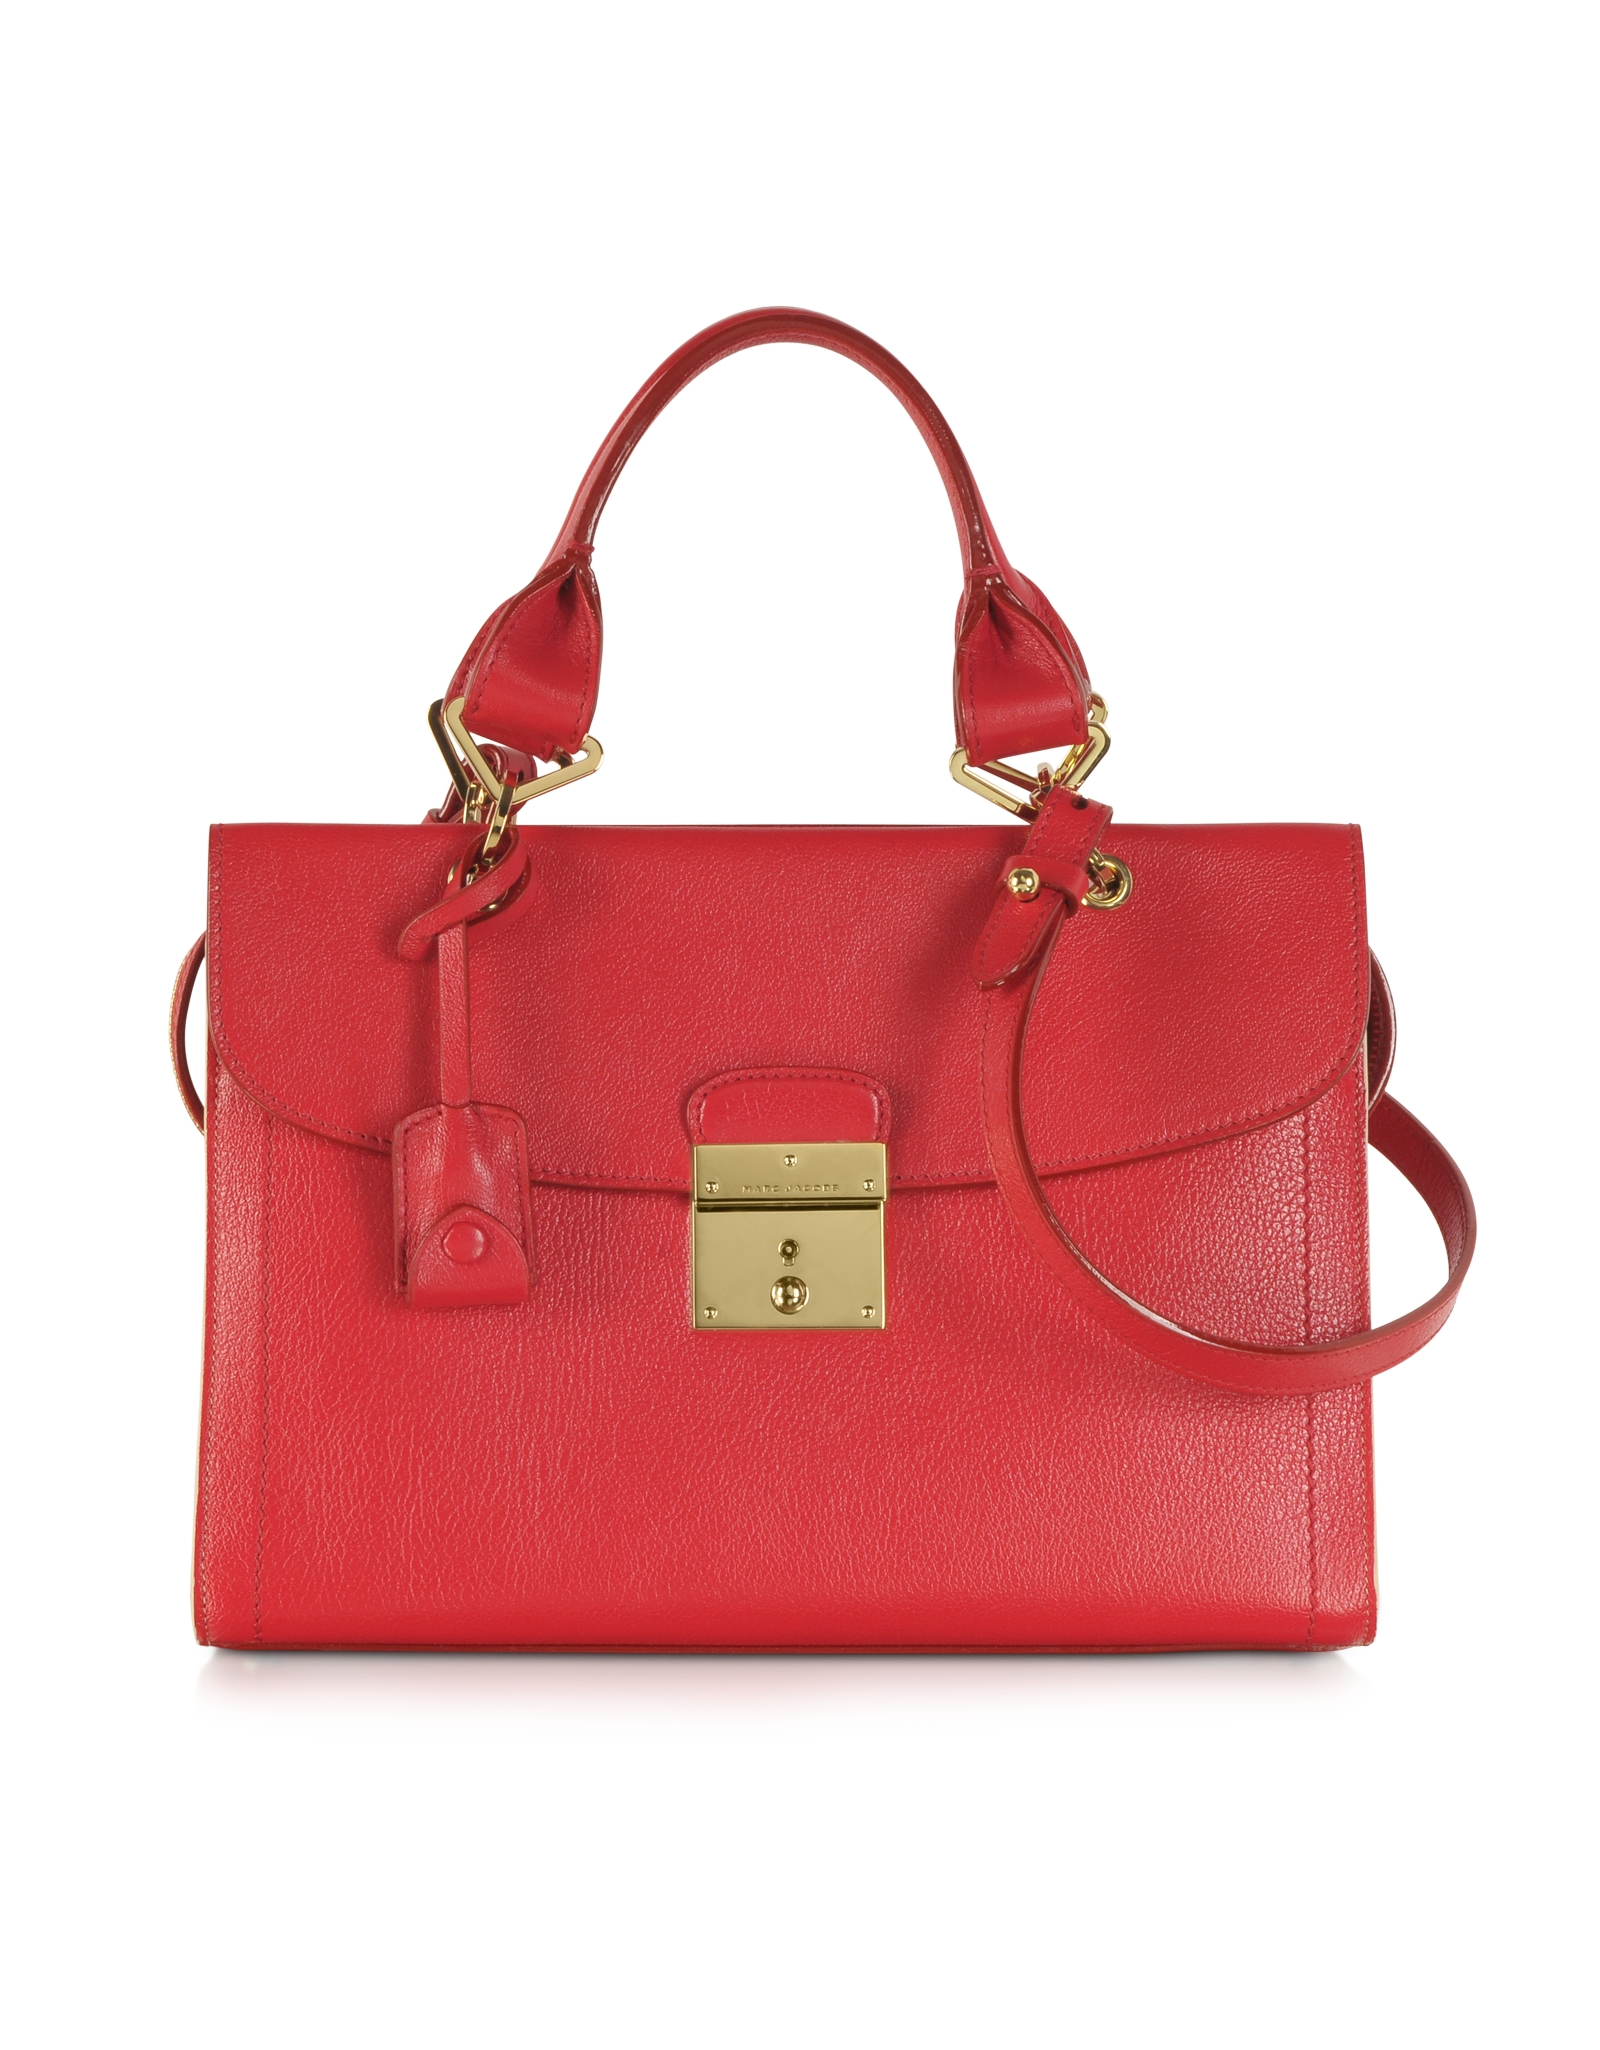 Lyst - Marc jacobs The Mini 54 Flame Red Leather Handbag in Red